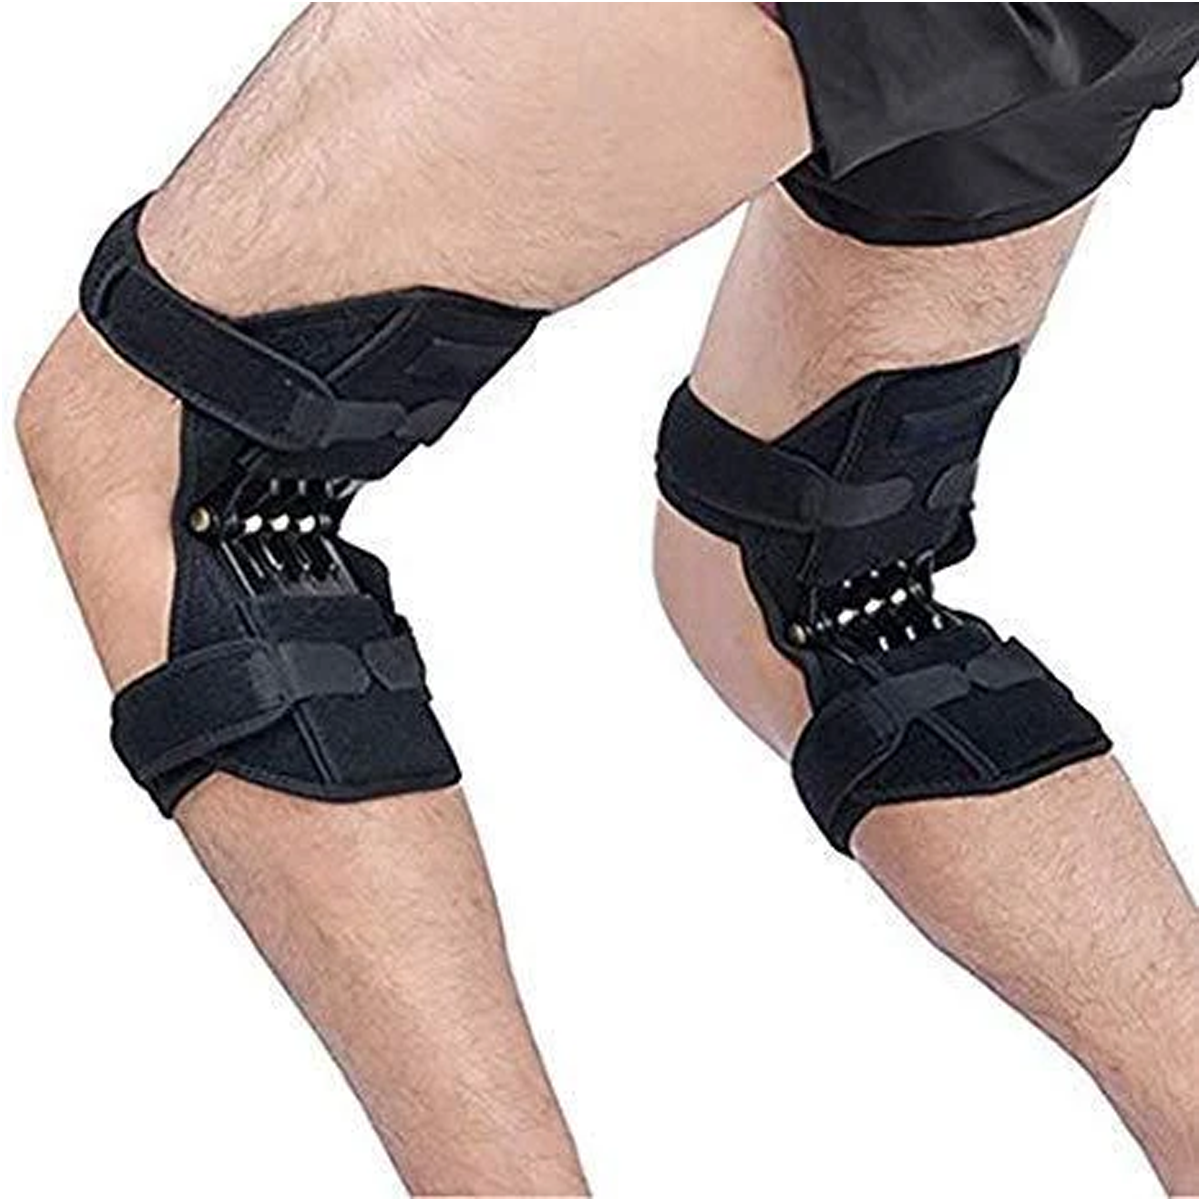 Power Knee Joint Support Knee Pads - NASUS